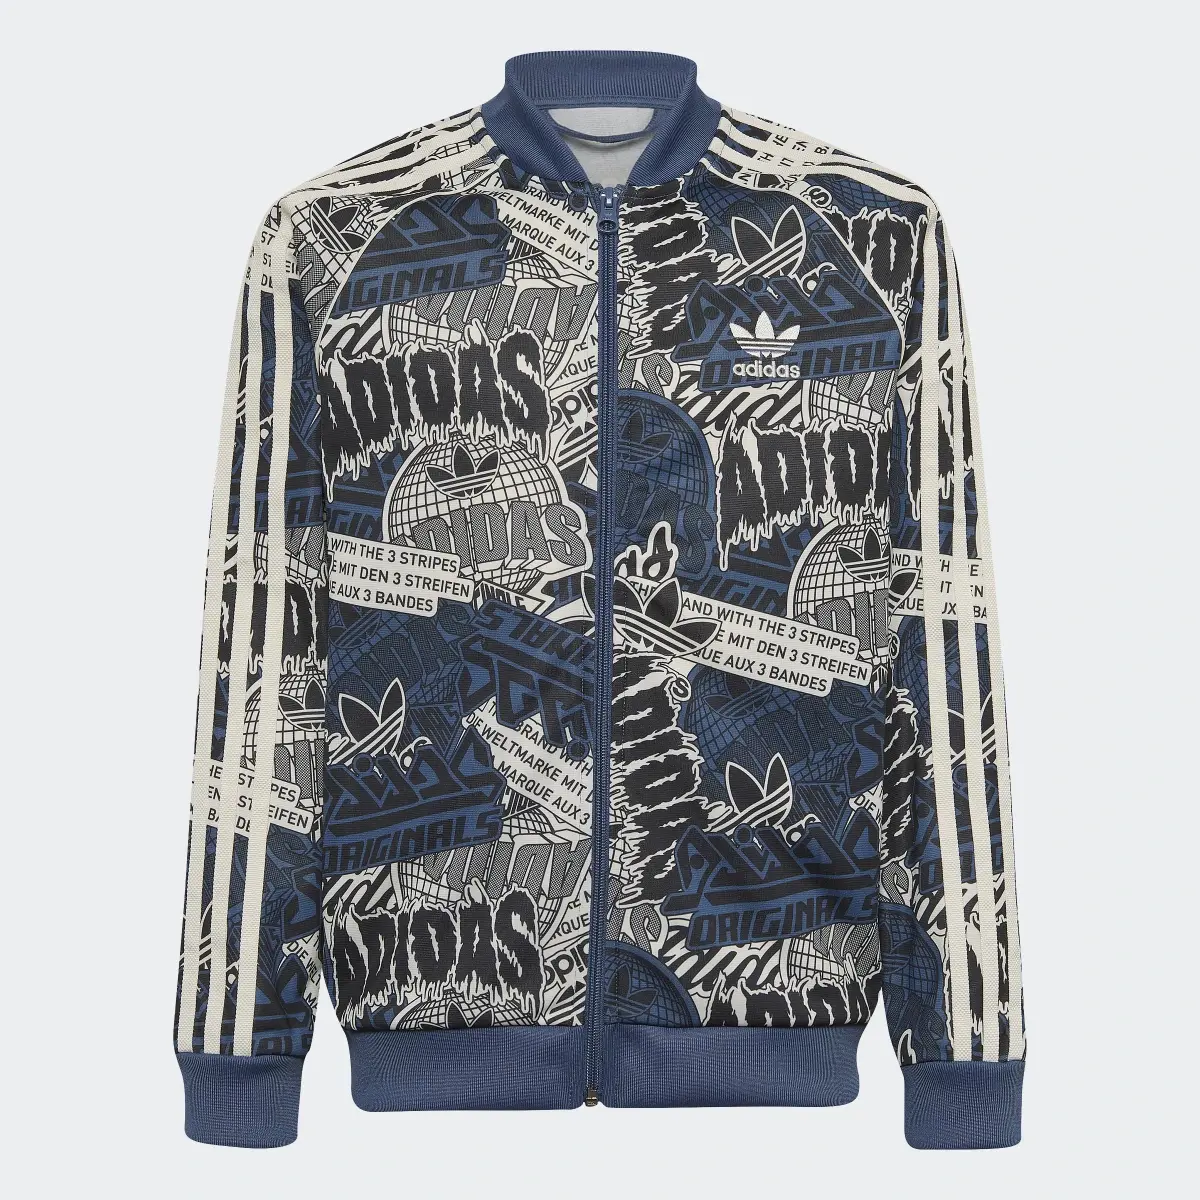 Adidas Allover Print SST Track Top. 1